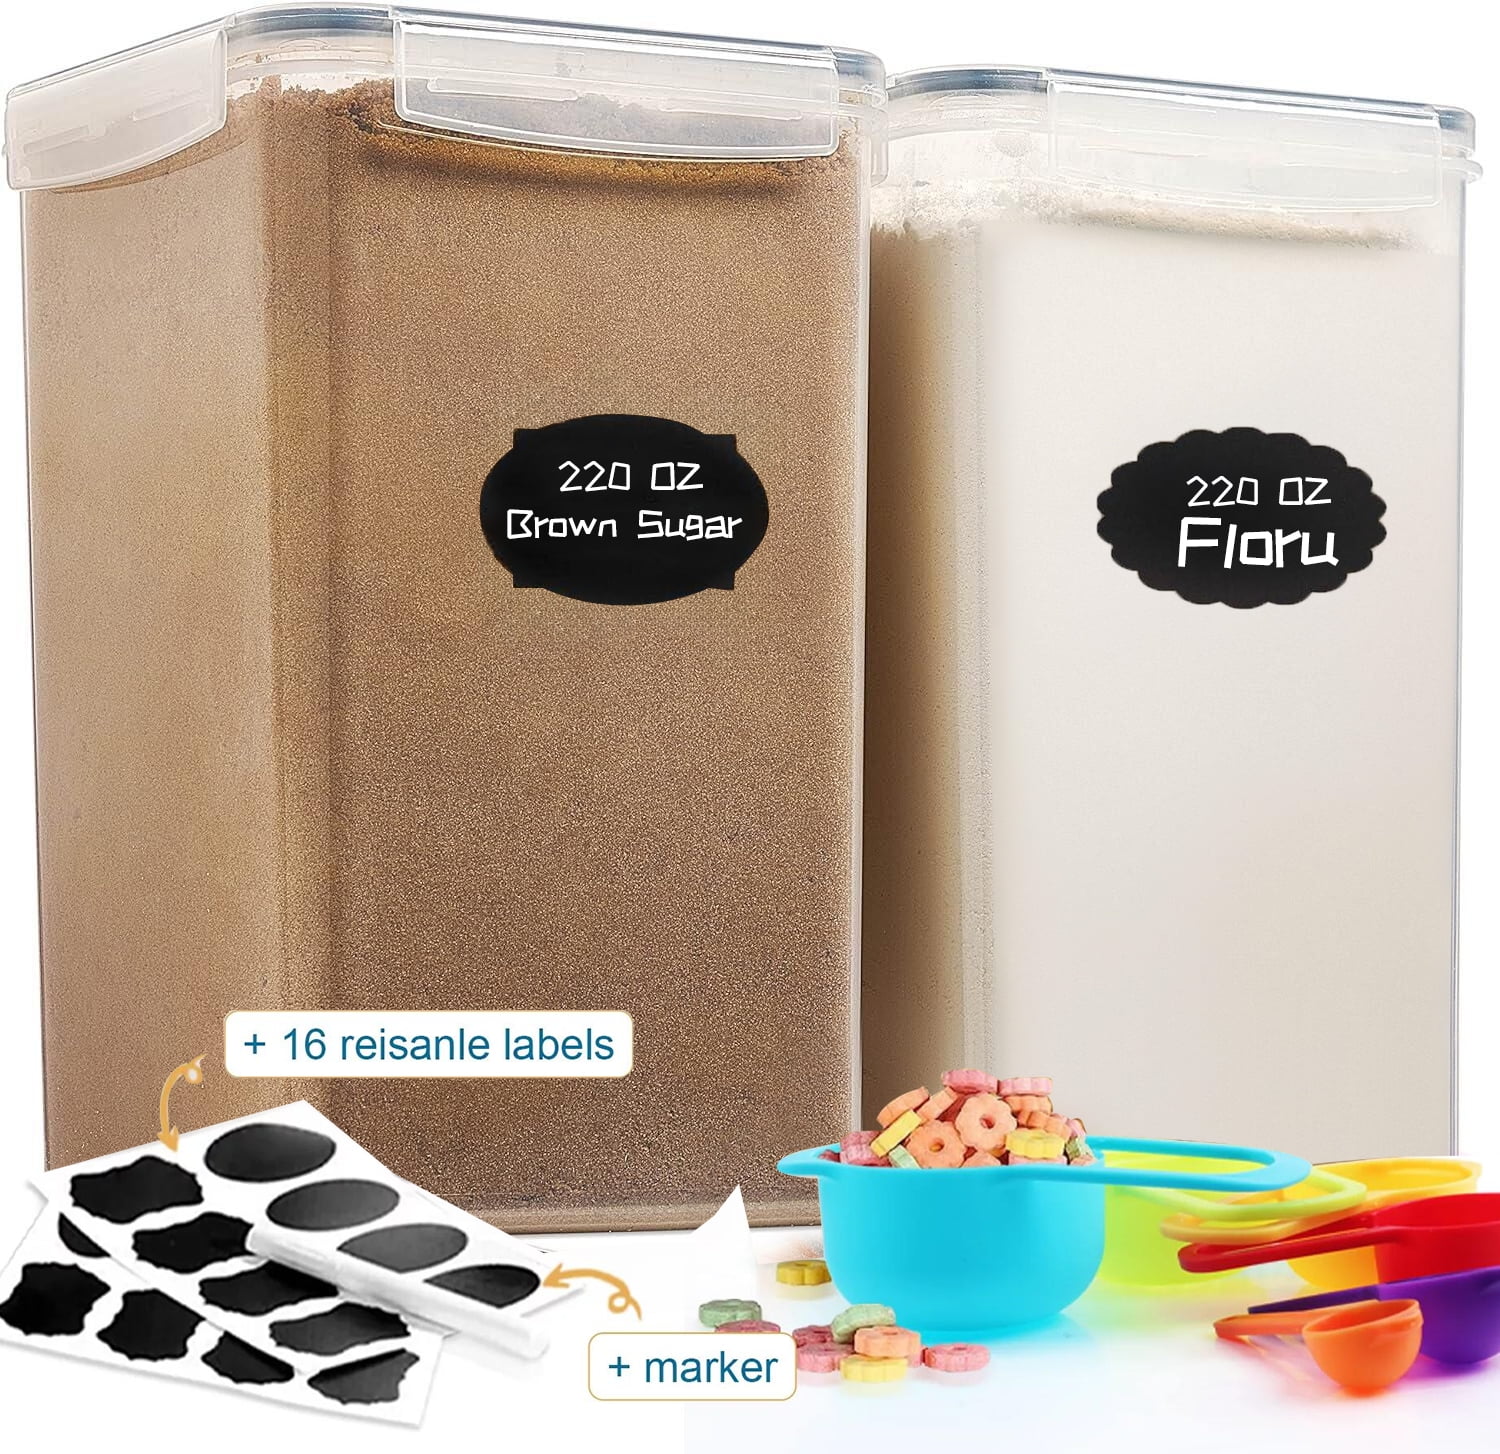 Grusce Flour and Sugar Containers Airtight 10 lb BPA Free Airtight Plastic Food Storage Containers with Easy Lock Lids and Measuring Cup,Pasta Flour